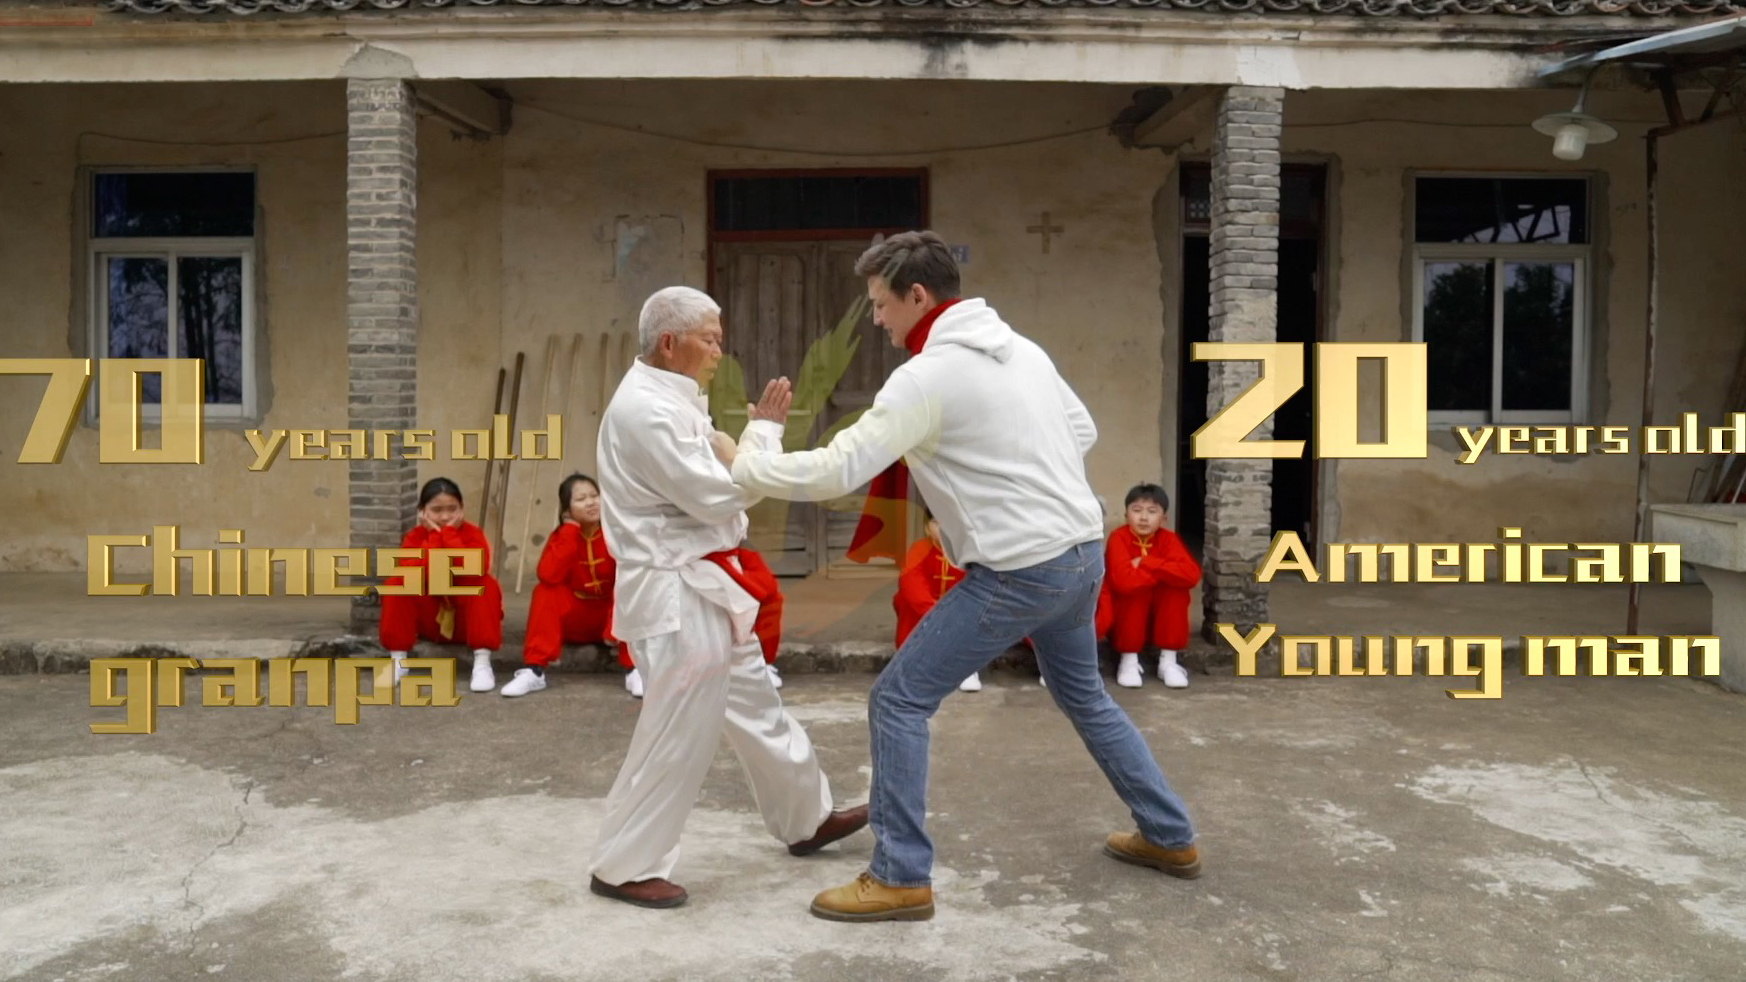 An American Gen Zer's journey to learn about kung fu